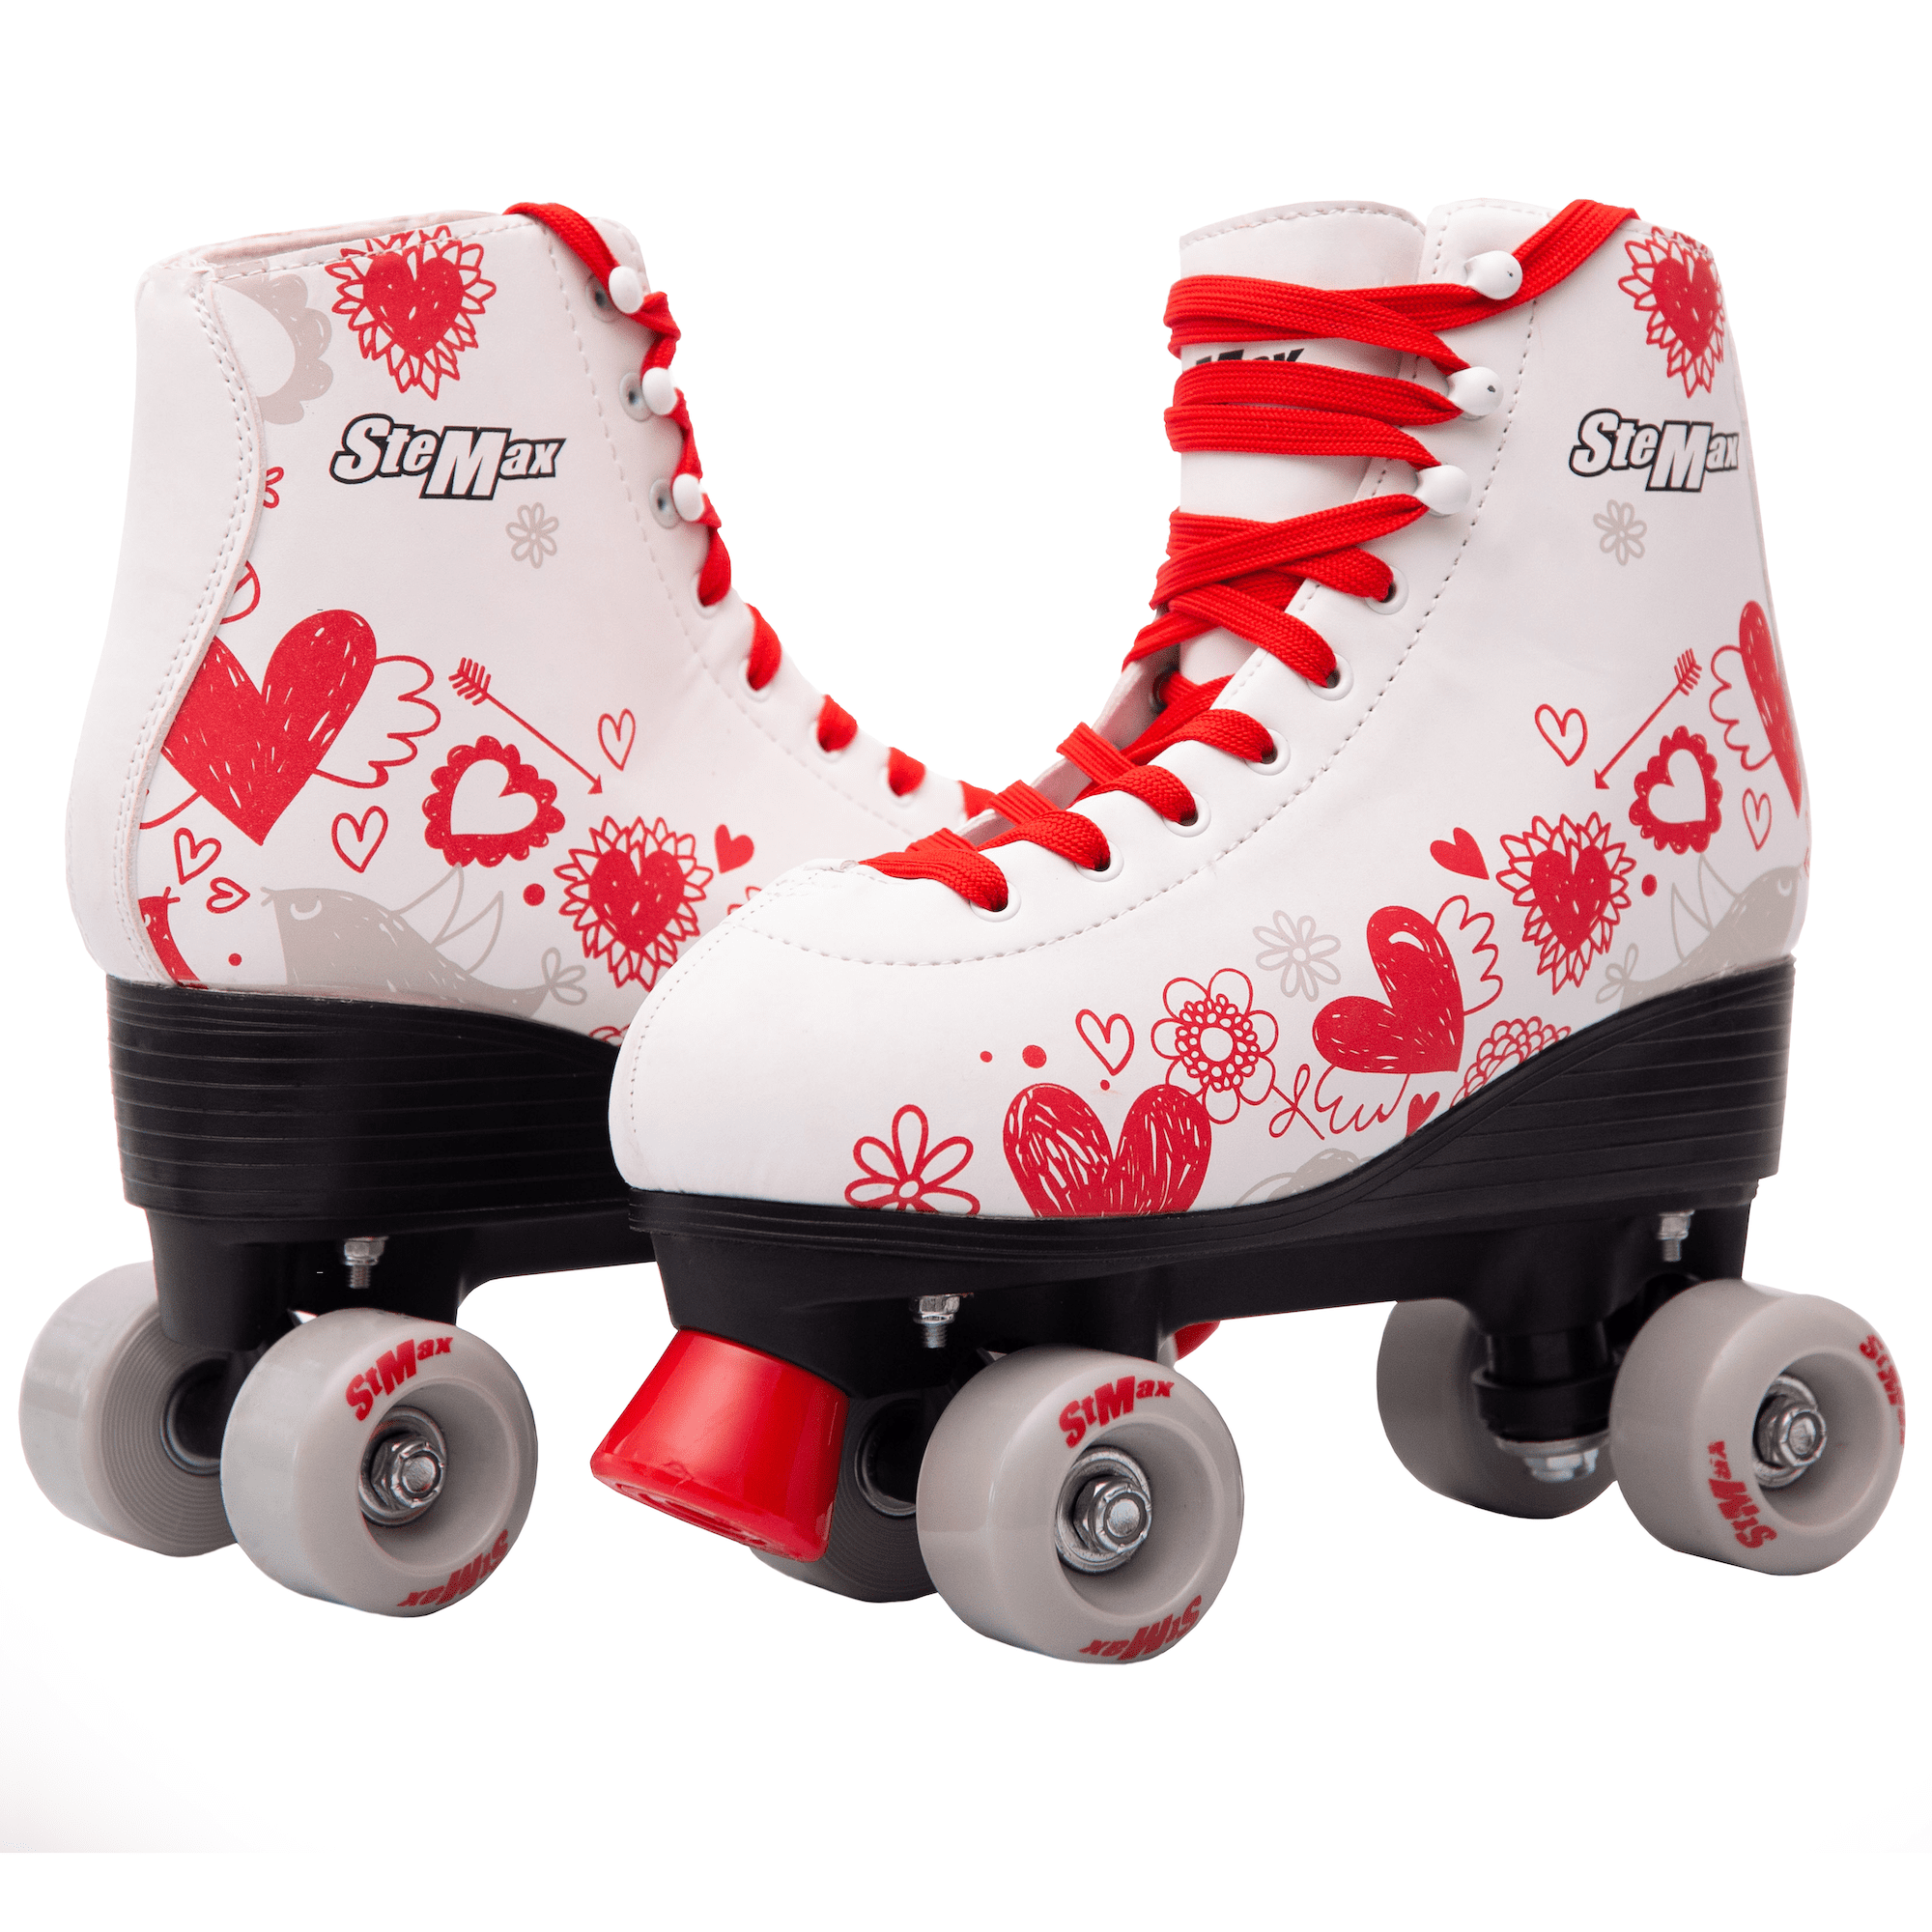 Quad Roller Skates for Girls and Women Size 8 Adult White and pink Heart Derby 